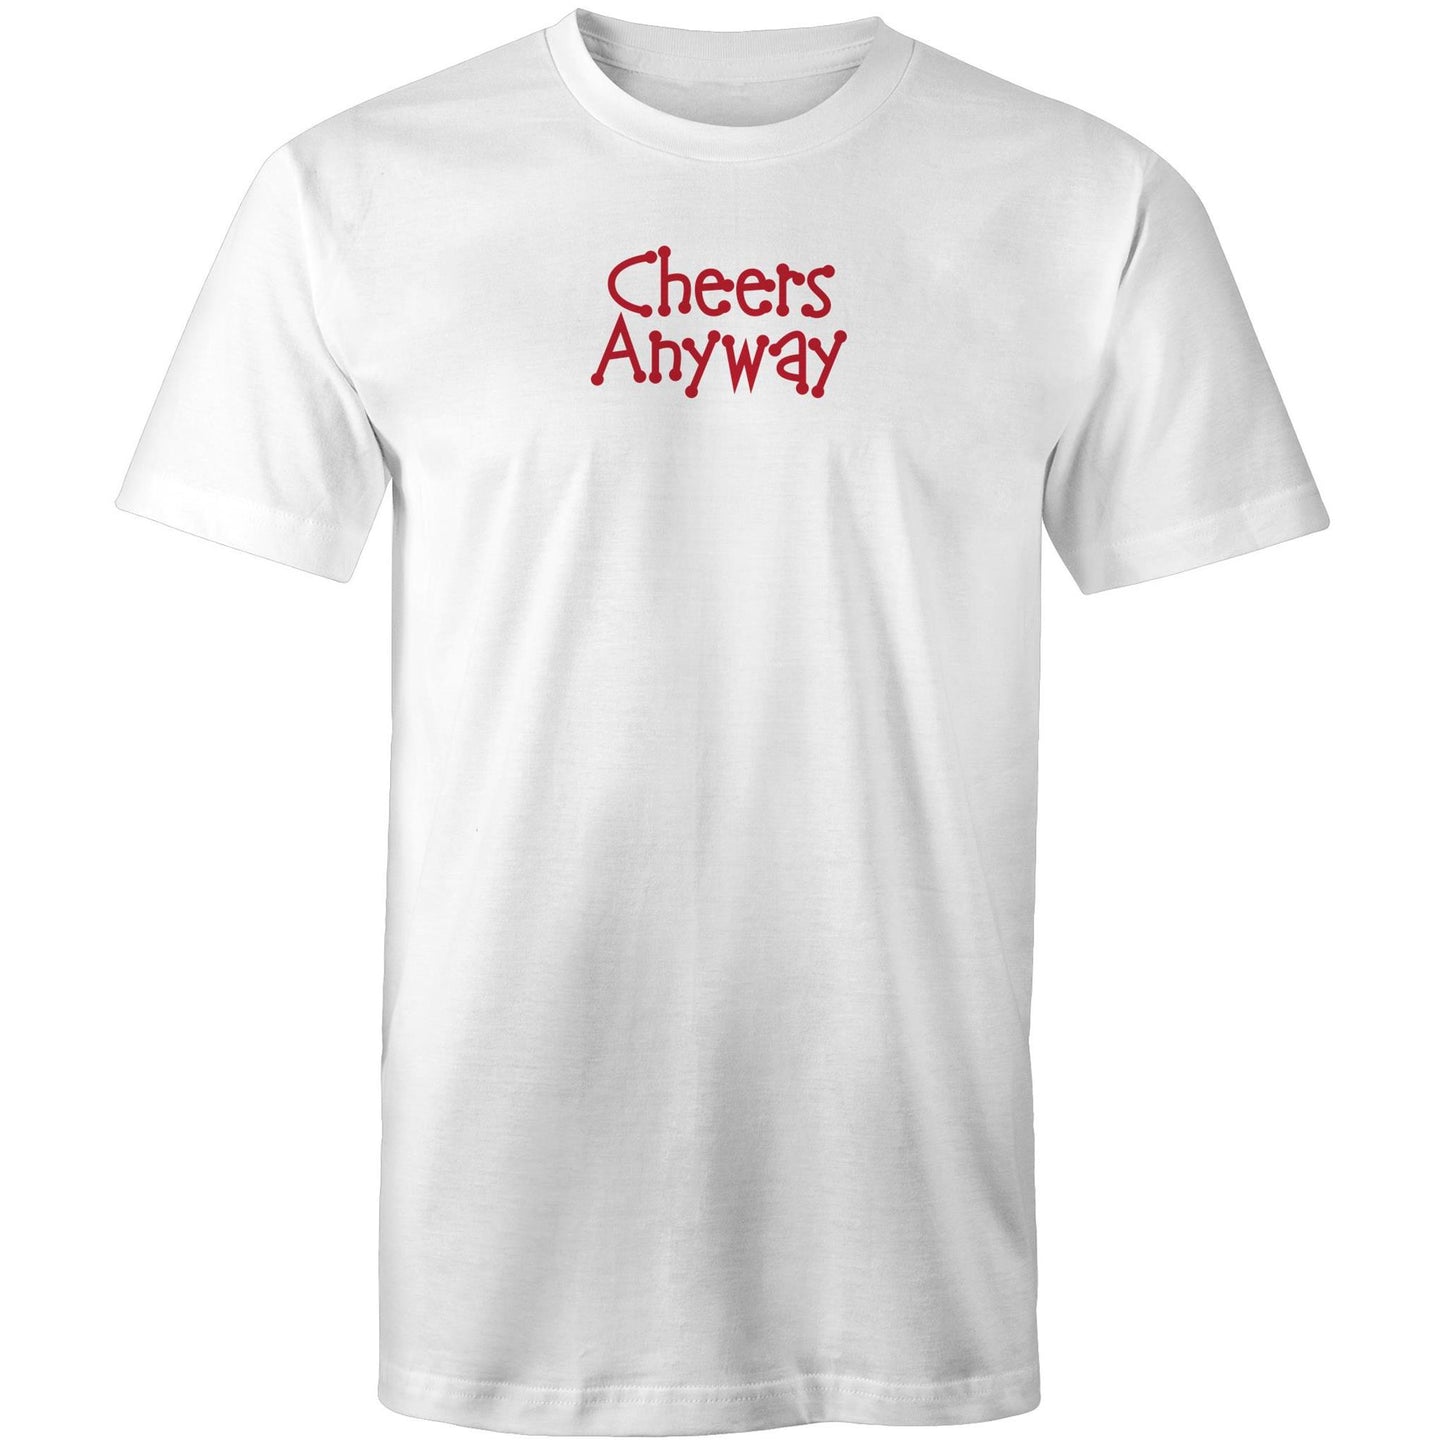 Cheers Anyway T Shirts for Men (Unisex)